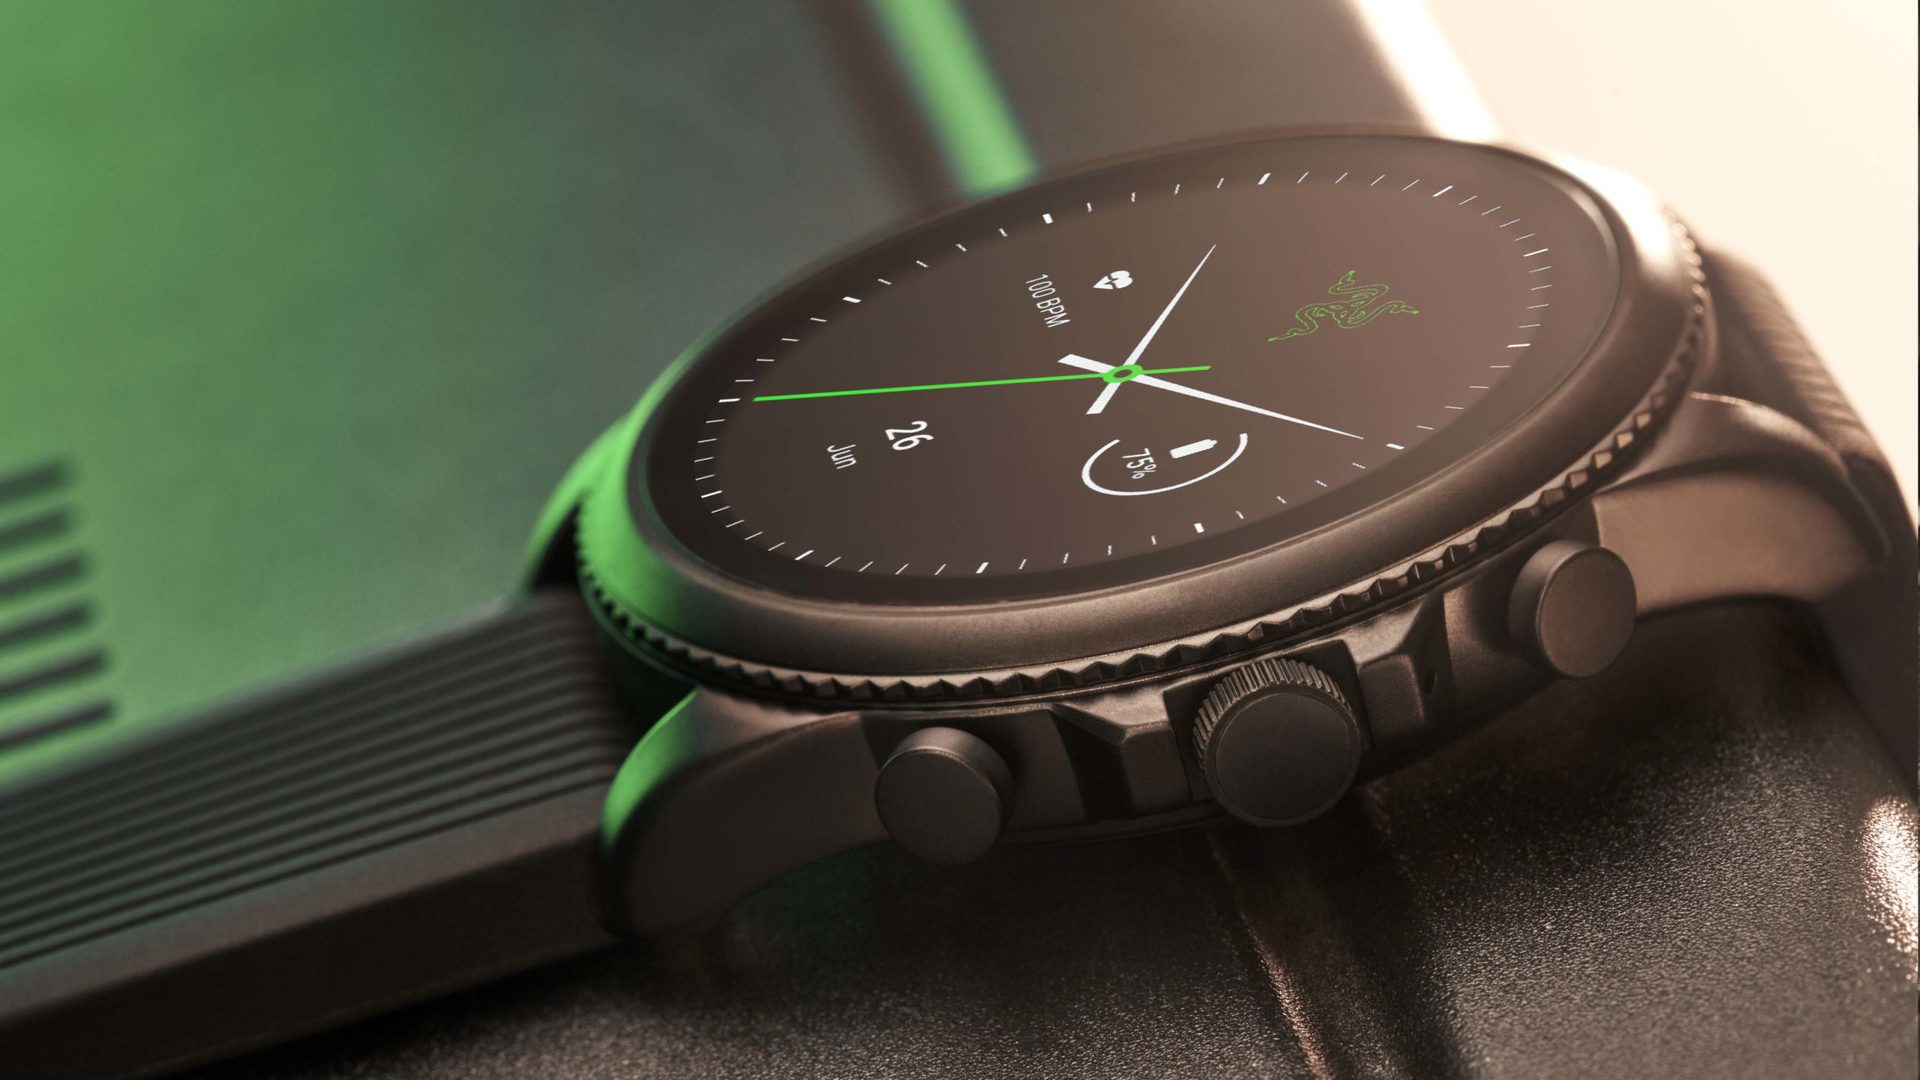 Razer X Fossil Gen 6: limited edition OS watch Android Authority